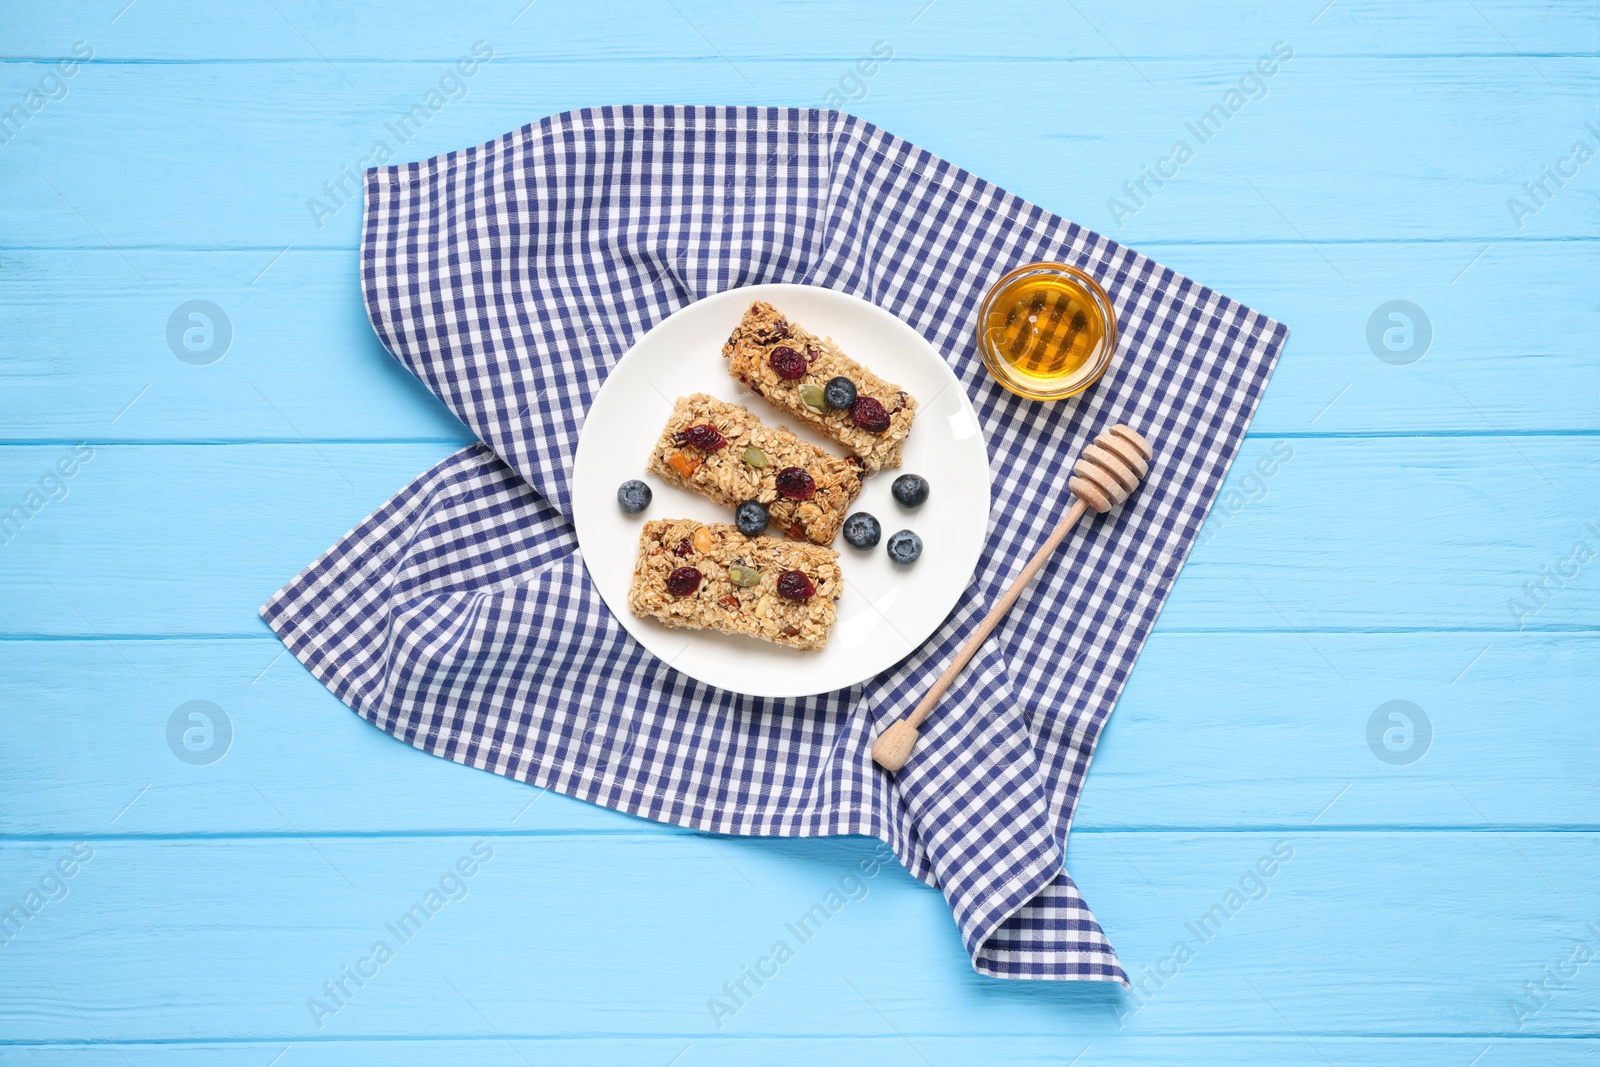 Photo of Tasty granola bars served on light blue wooden table, top view